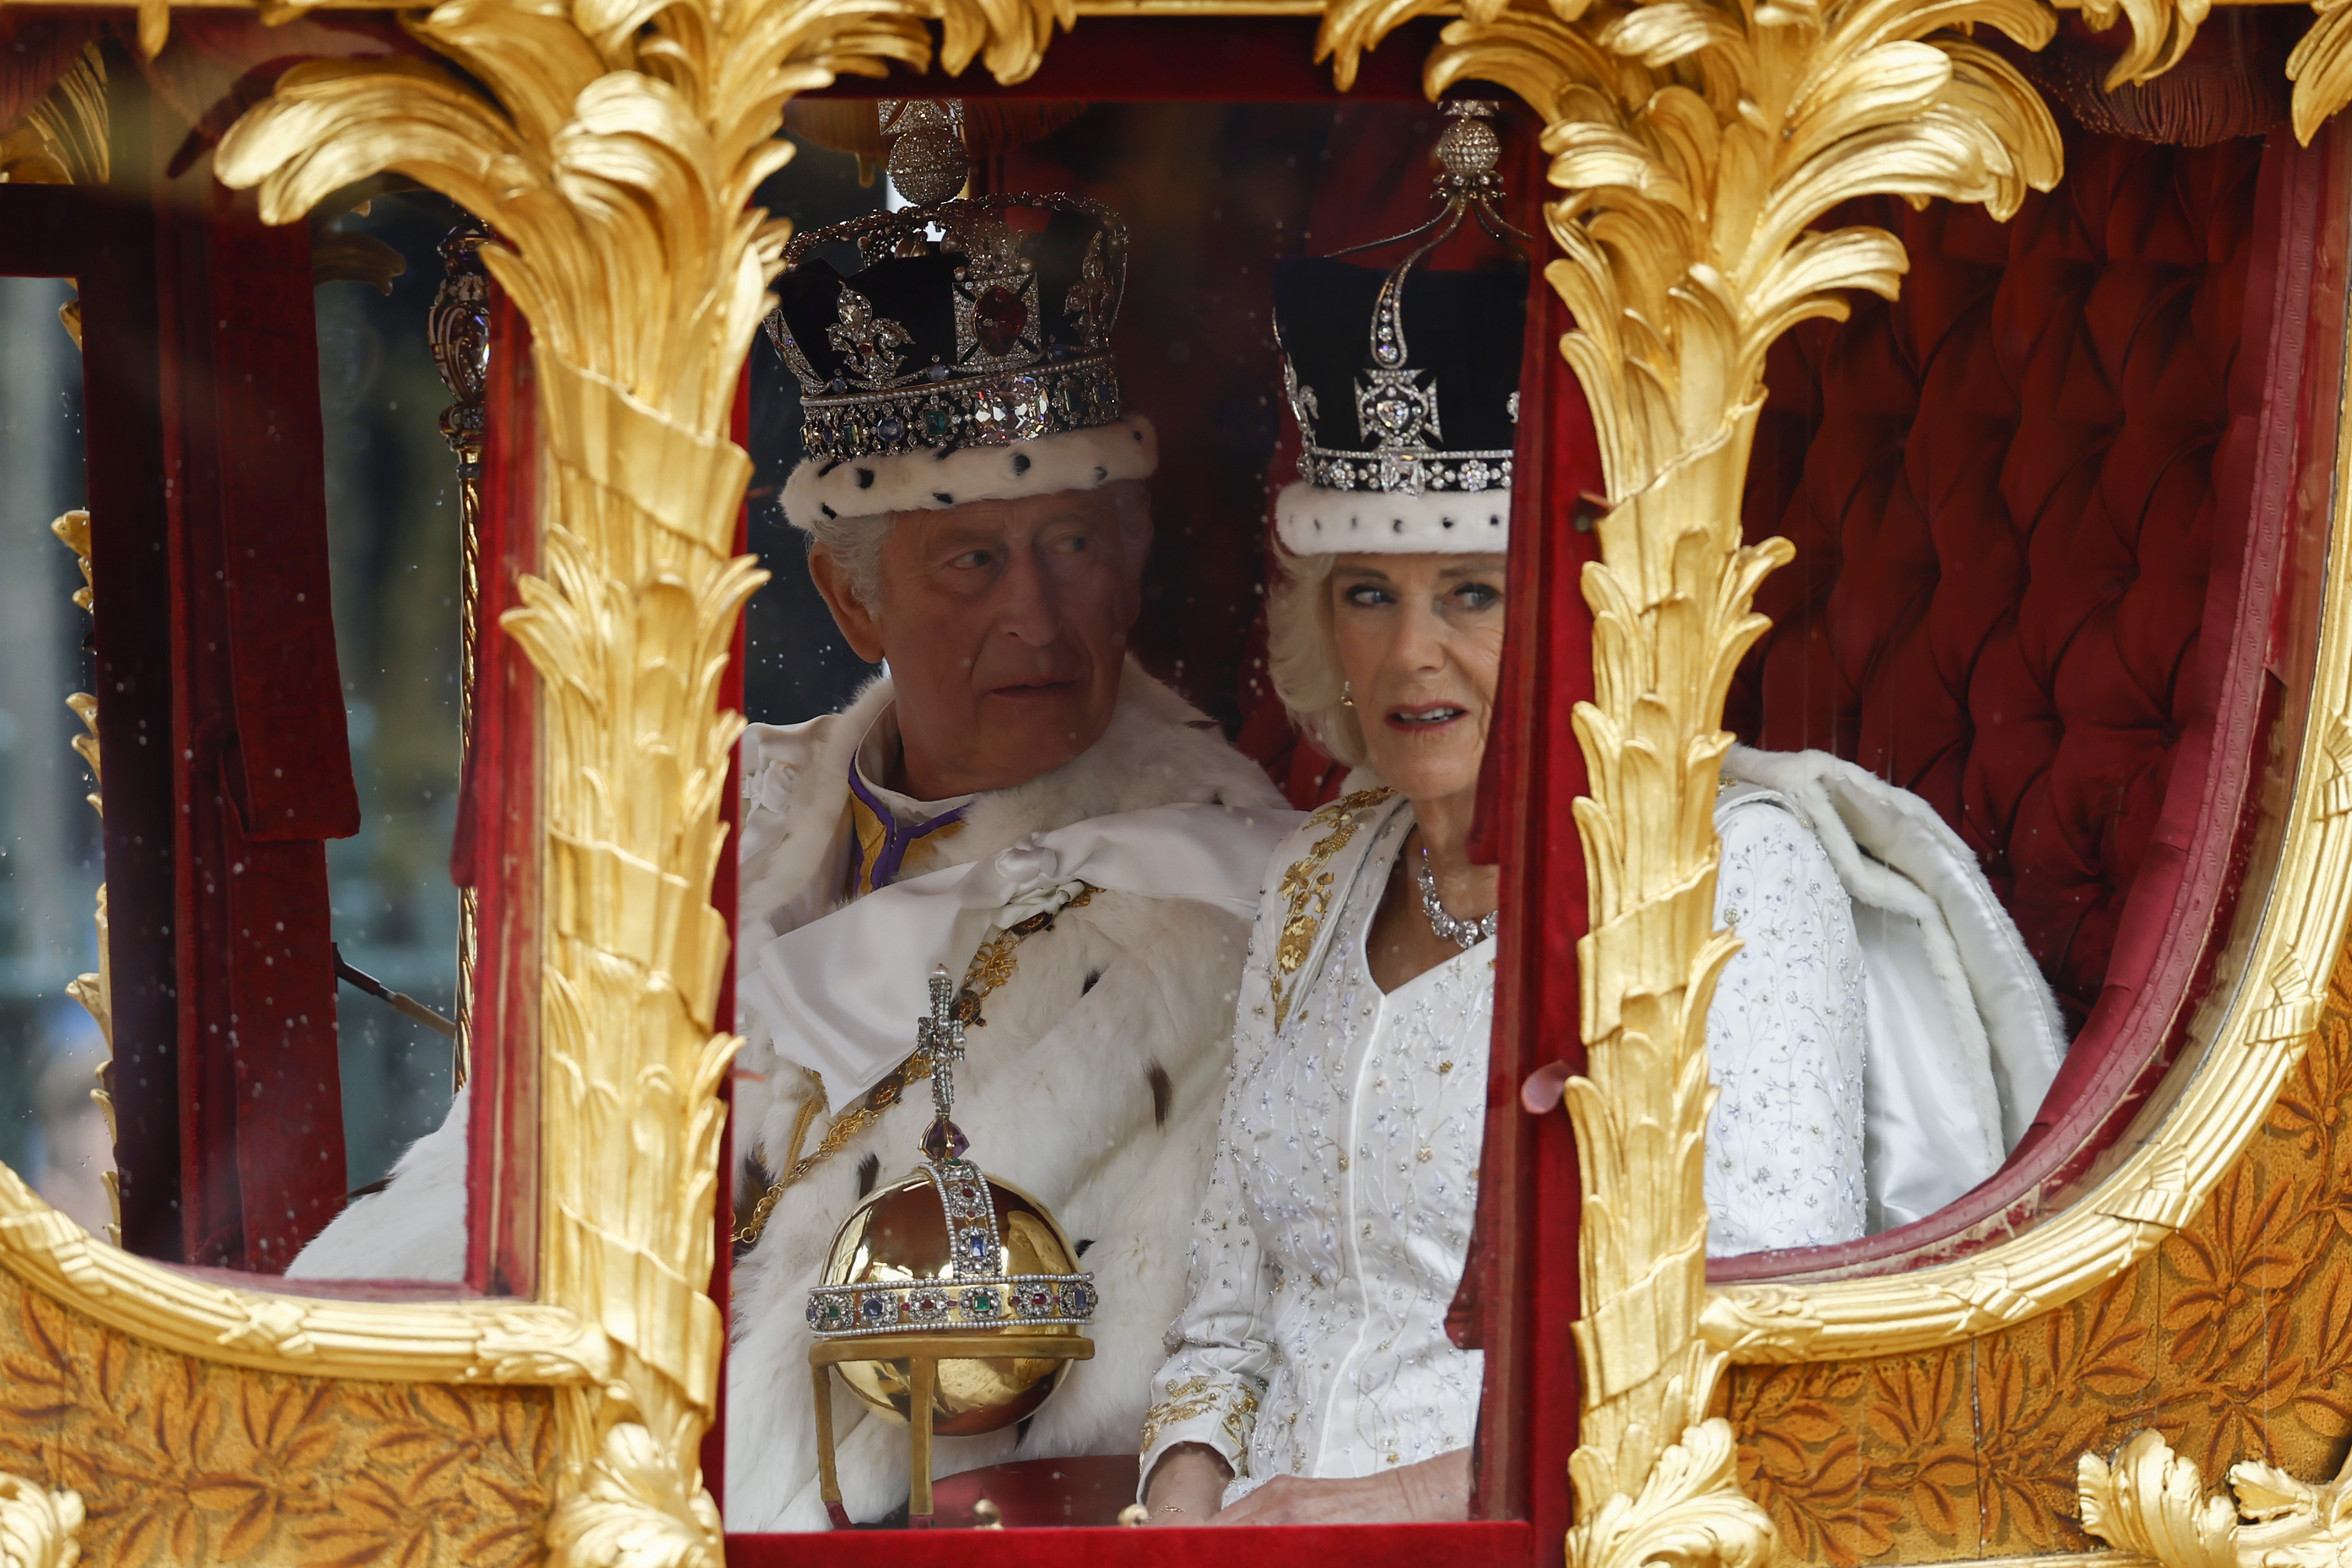 King Charles Iii news: King Charles III and Queen Consort Camilla to be  crowned on May 6, 2023 - The Economic Times